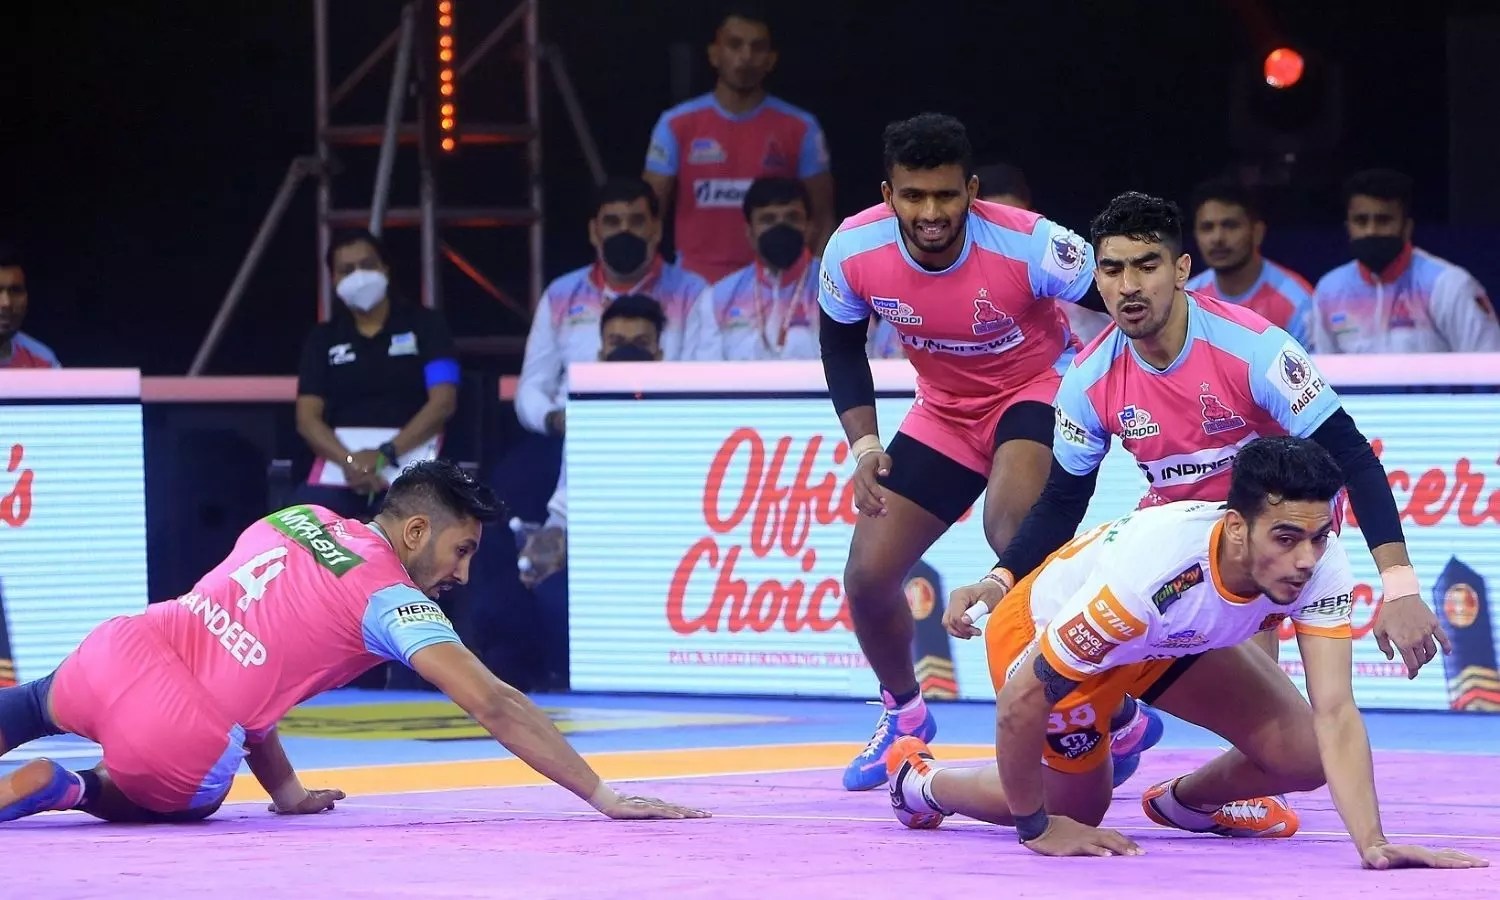 PKL Final LIVE: Jaipur Pink Panthers face Puneri Paltan in all important final, Check LIVE streaming info, Time, Squads, Head-to-Head record, All you need to know about Pro Kabaddi League 2022 Final